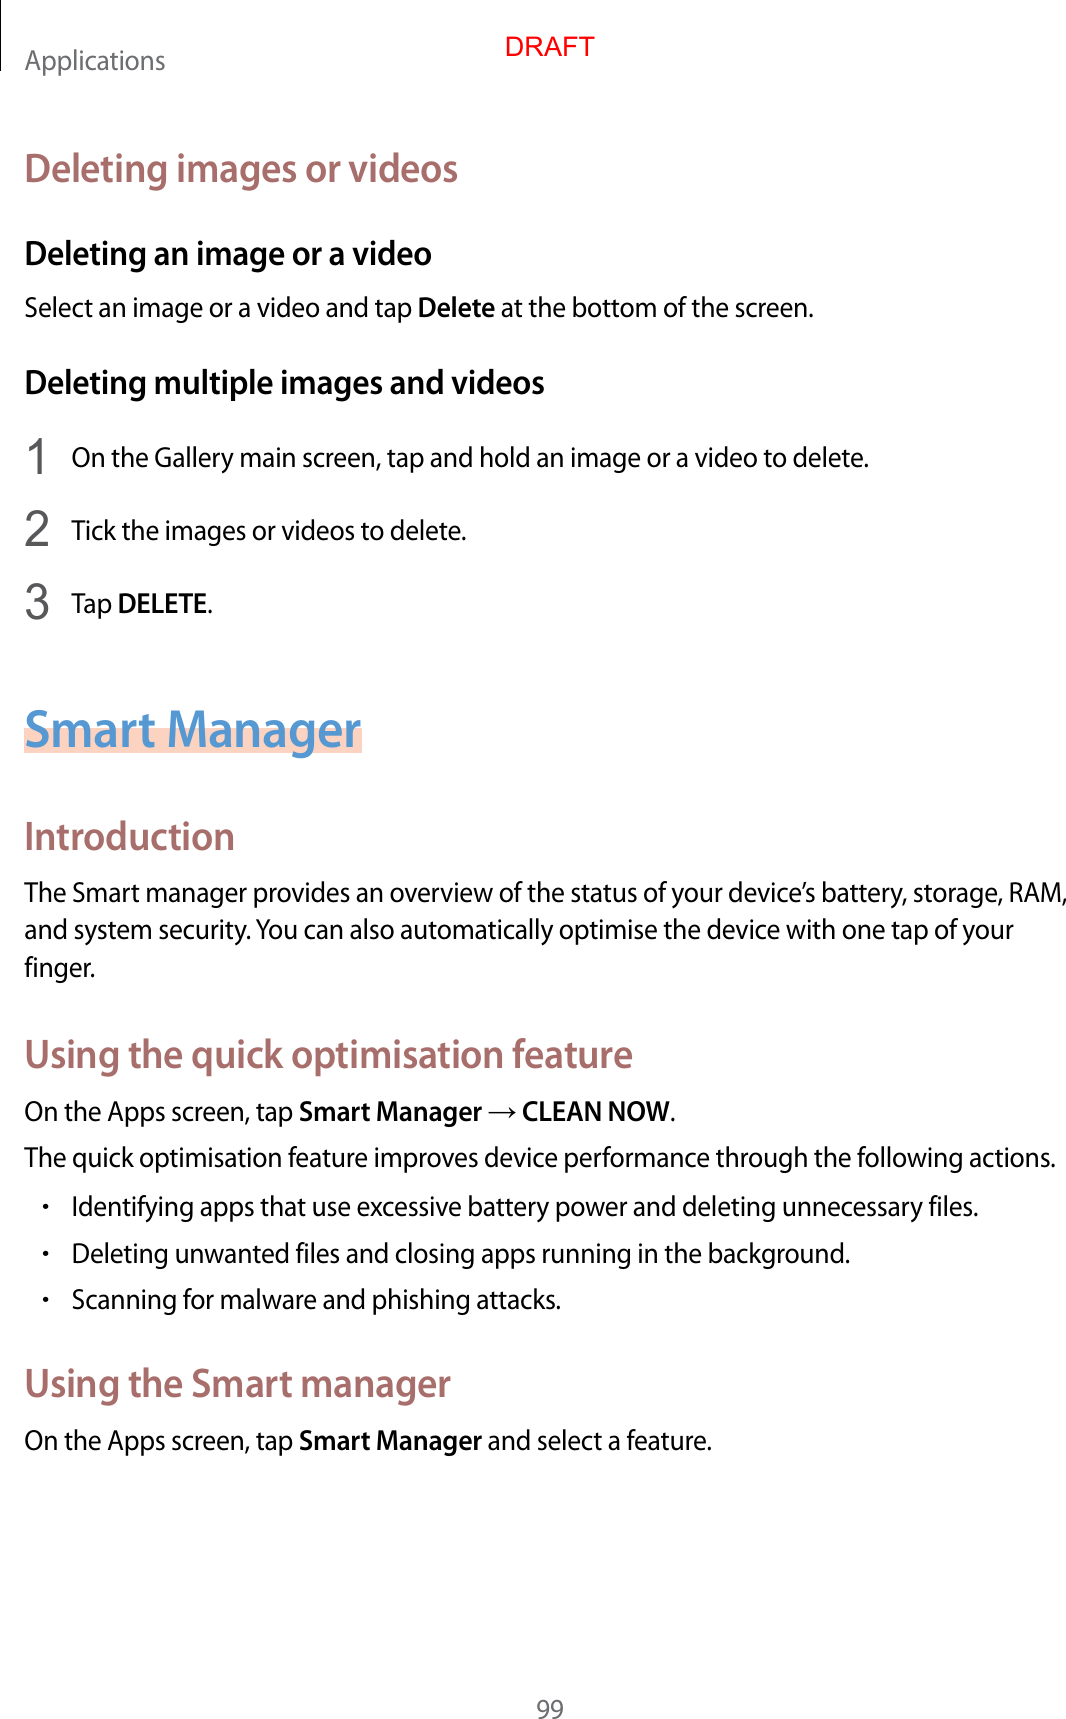 Applications99Deleting images or videosDeleting an image or a videoSelect an image or a video and tap Delete at the bottom of the screen.Deleting multiple images and videos1  On the Gallery main screen, tap and hold an image or a video to delete.2  Tick the images or videos to delete.3  Tap DELETE.Smart ManagerIntroductionThe Smart manager provides an overview of the status of your device’s battery, storage, RAM, and system security. You can also automatically optimise the device with one tap of your finger.Using the quick optimisation featureOn the Apps screen, tap Smart Manager  CLEAN NOW.The quick optimisation feature improves device performance through the following actions.•Identifying apps that use excessive battery power and deleting unnecessary files.•Deleting unwanted files and closing apps running in the background.•Scanning for malware and phishing attacks.Using the Smart managerOn the Apps screen, tap Smart Manager and select a feature.DRAFT